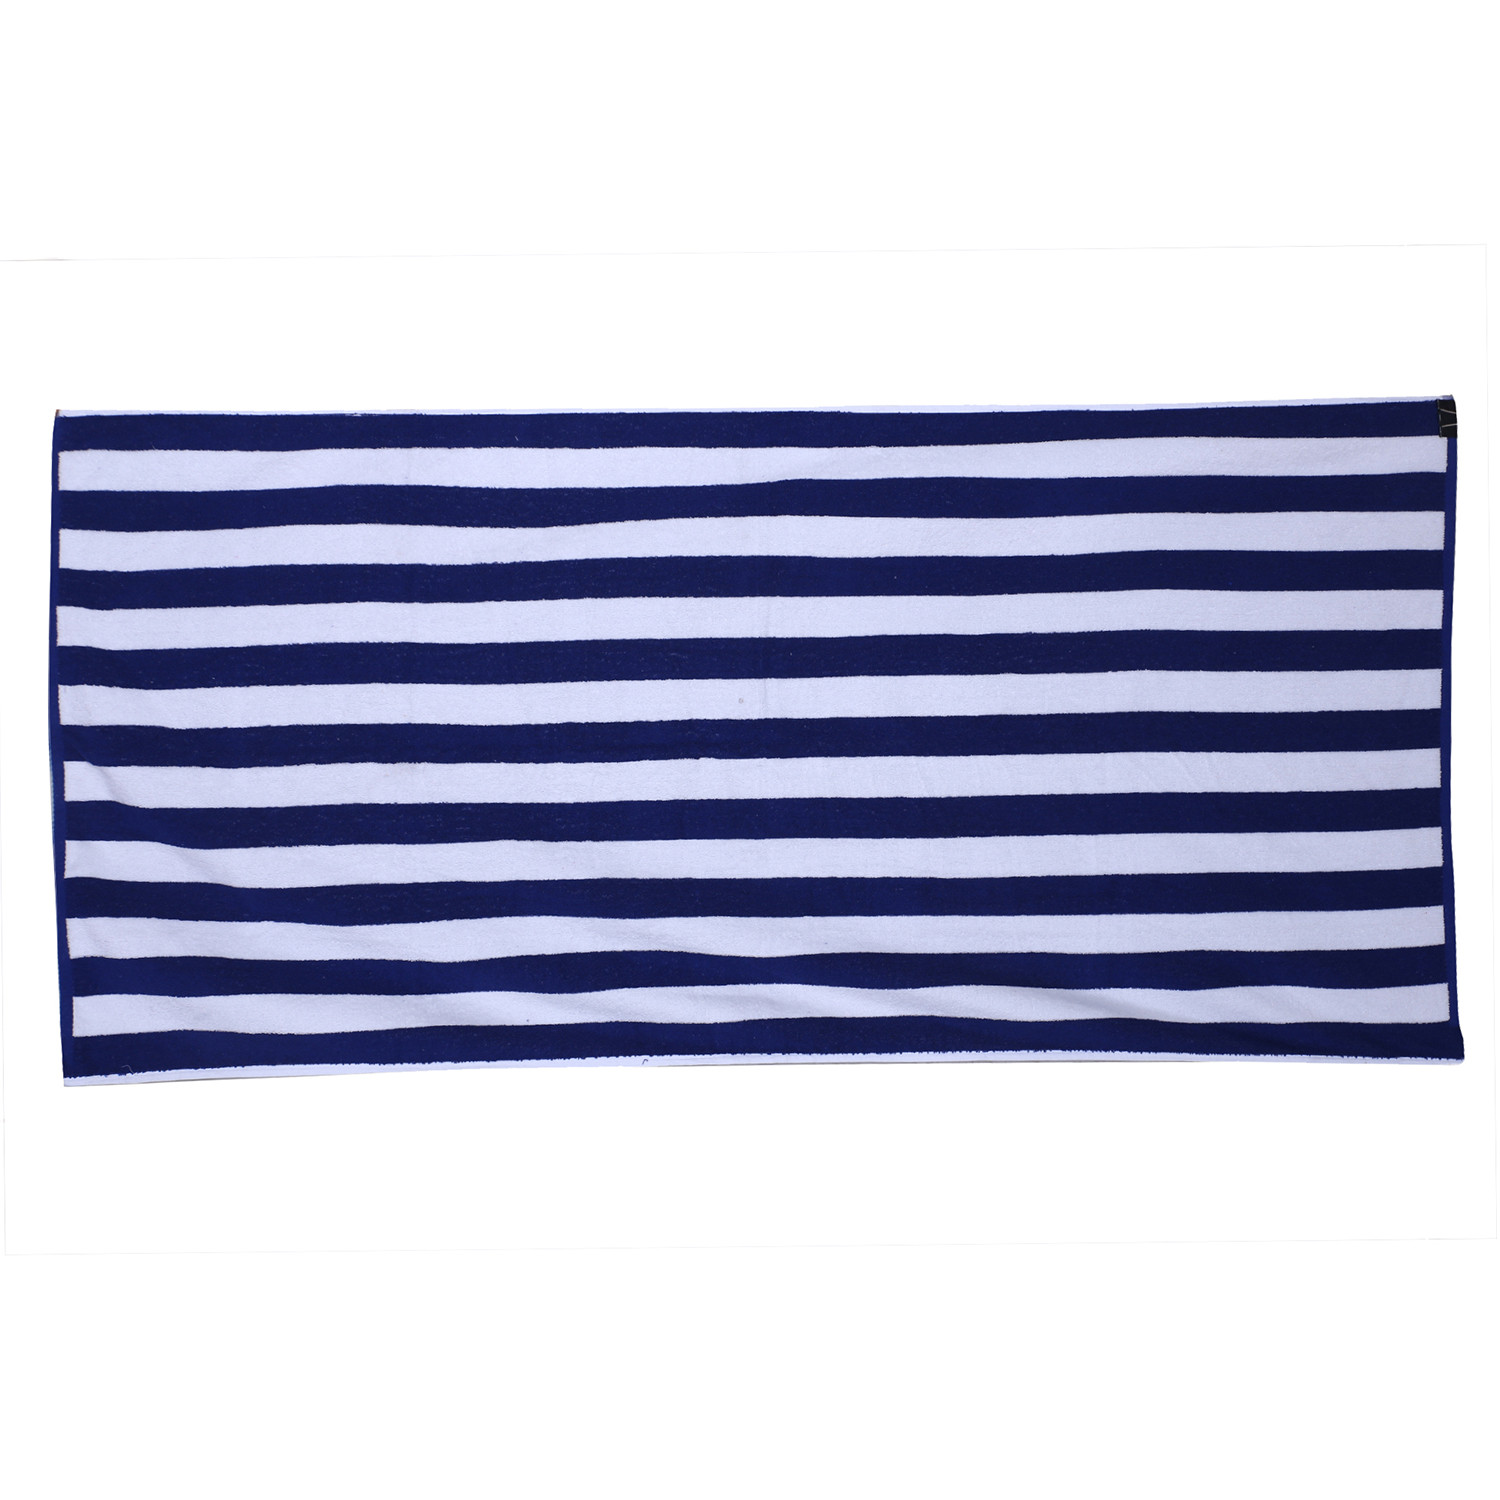 Kuber Industries Cotton Super Absorbent Bath Towel|Quick Dry Towel for Bath,Beach,Pool,Travel,Spa and Yoga,36 x 72 Inches, (Extra,Blue)